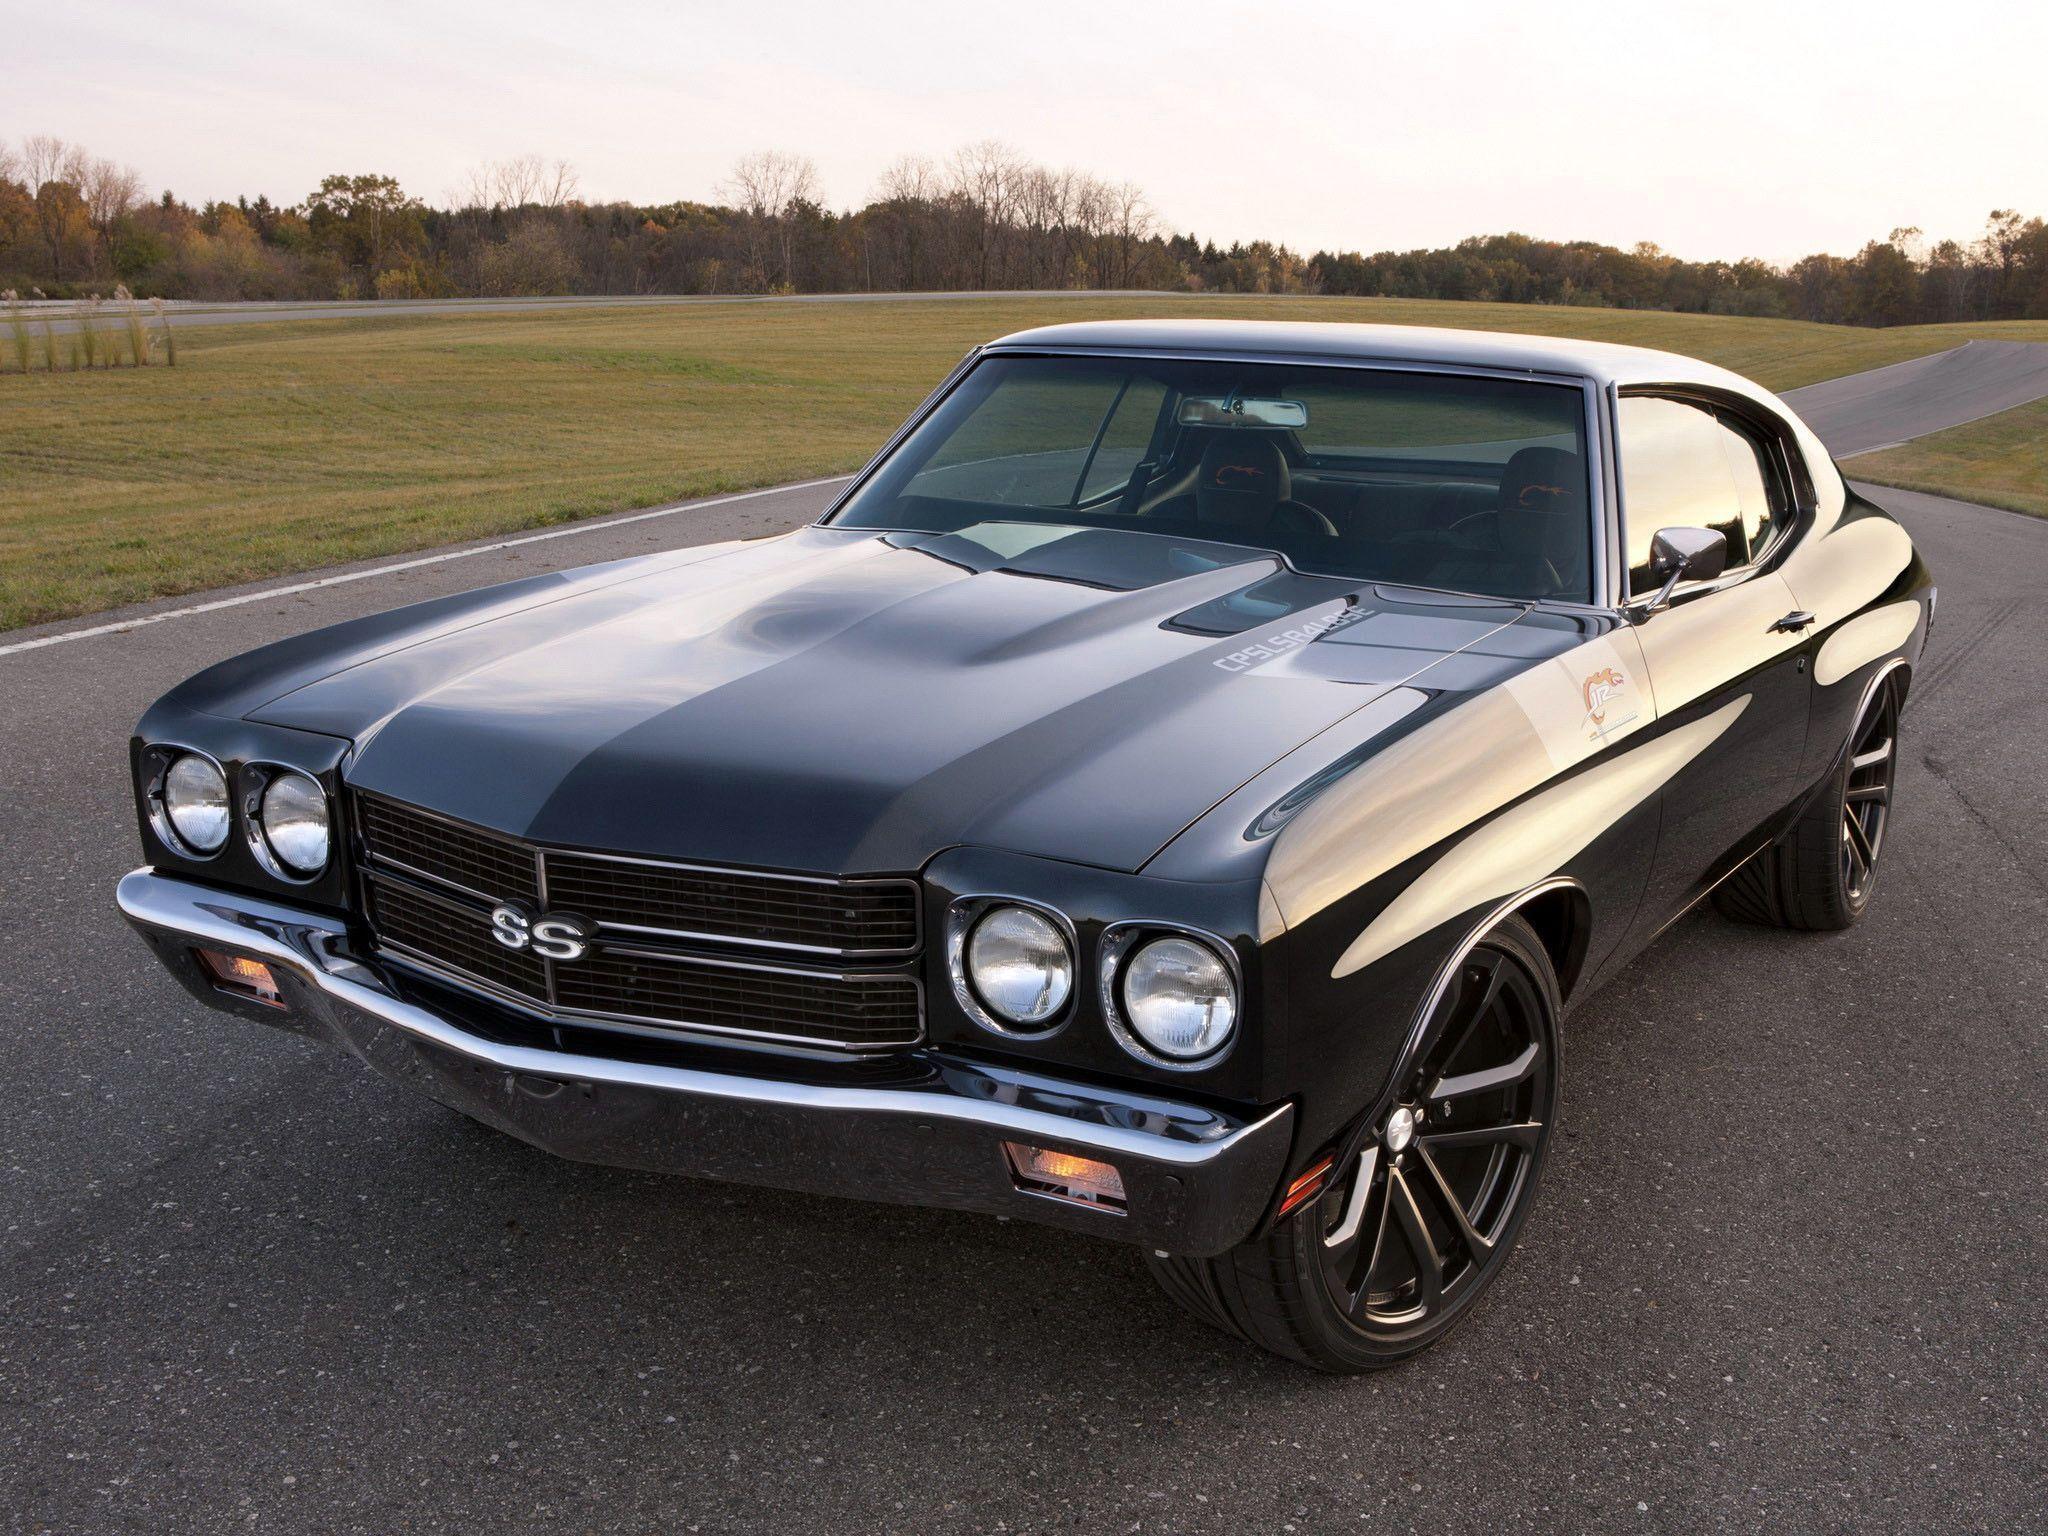 Chevy Chevelle Ss Wallpaper Image & Picture